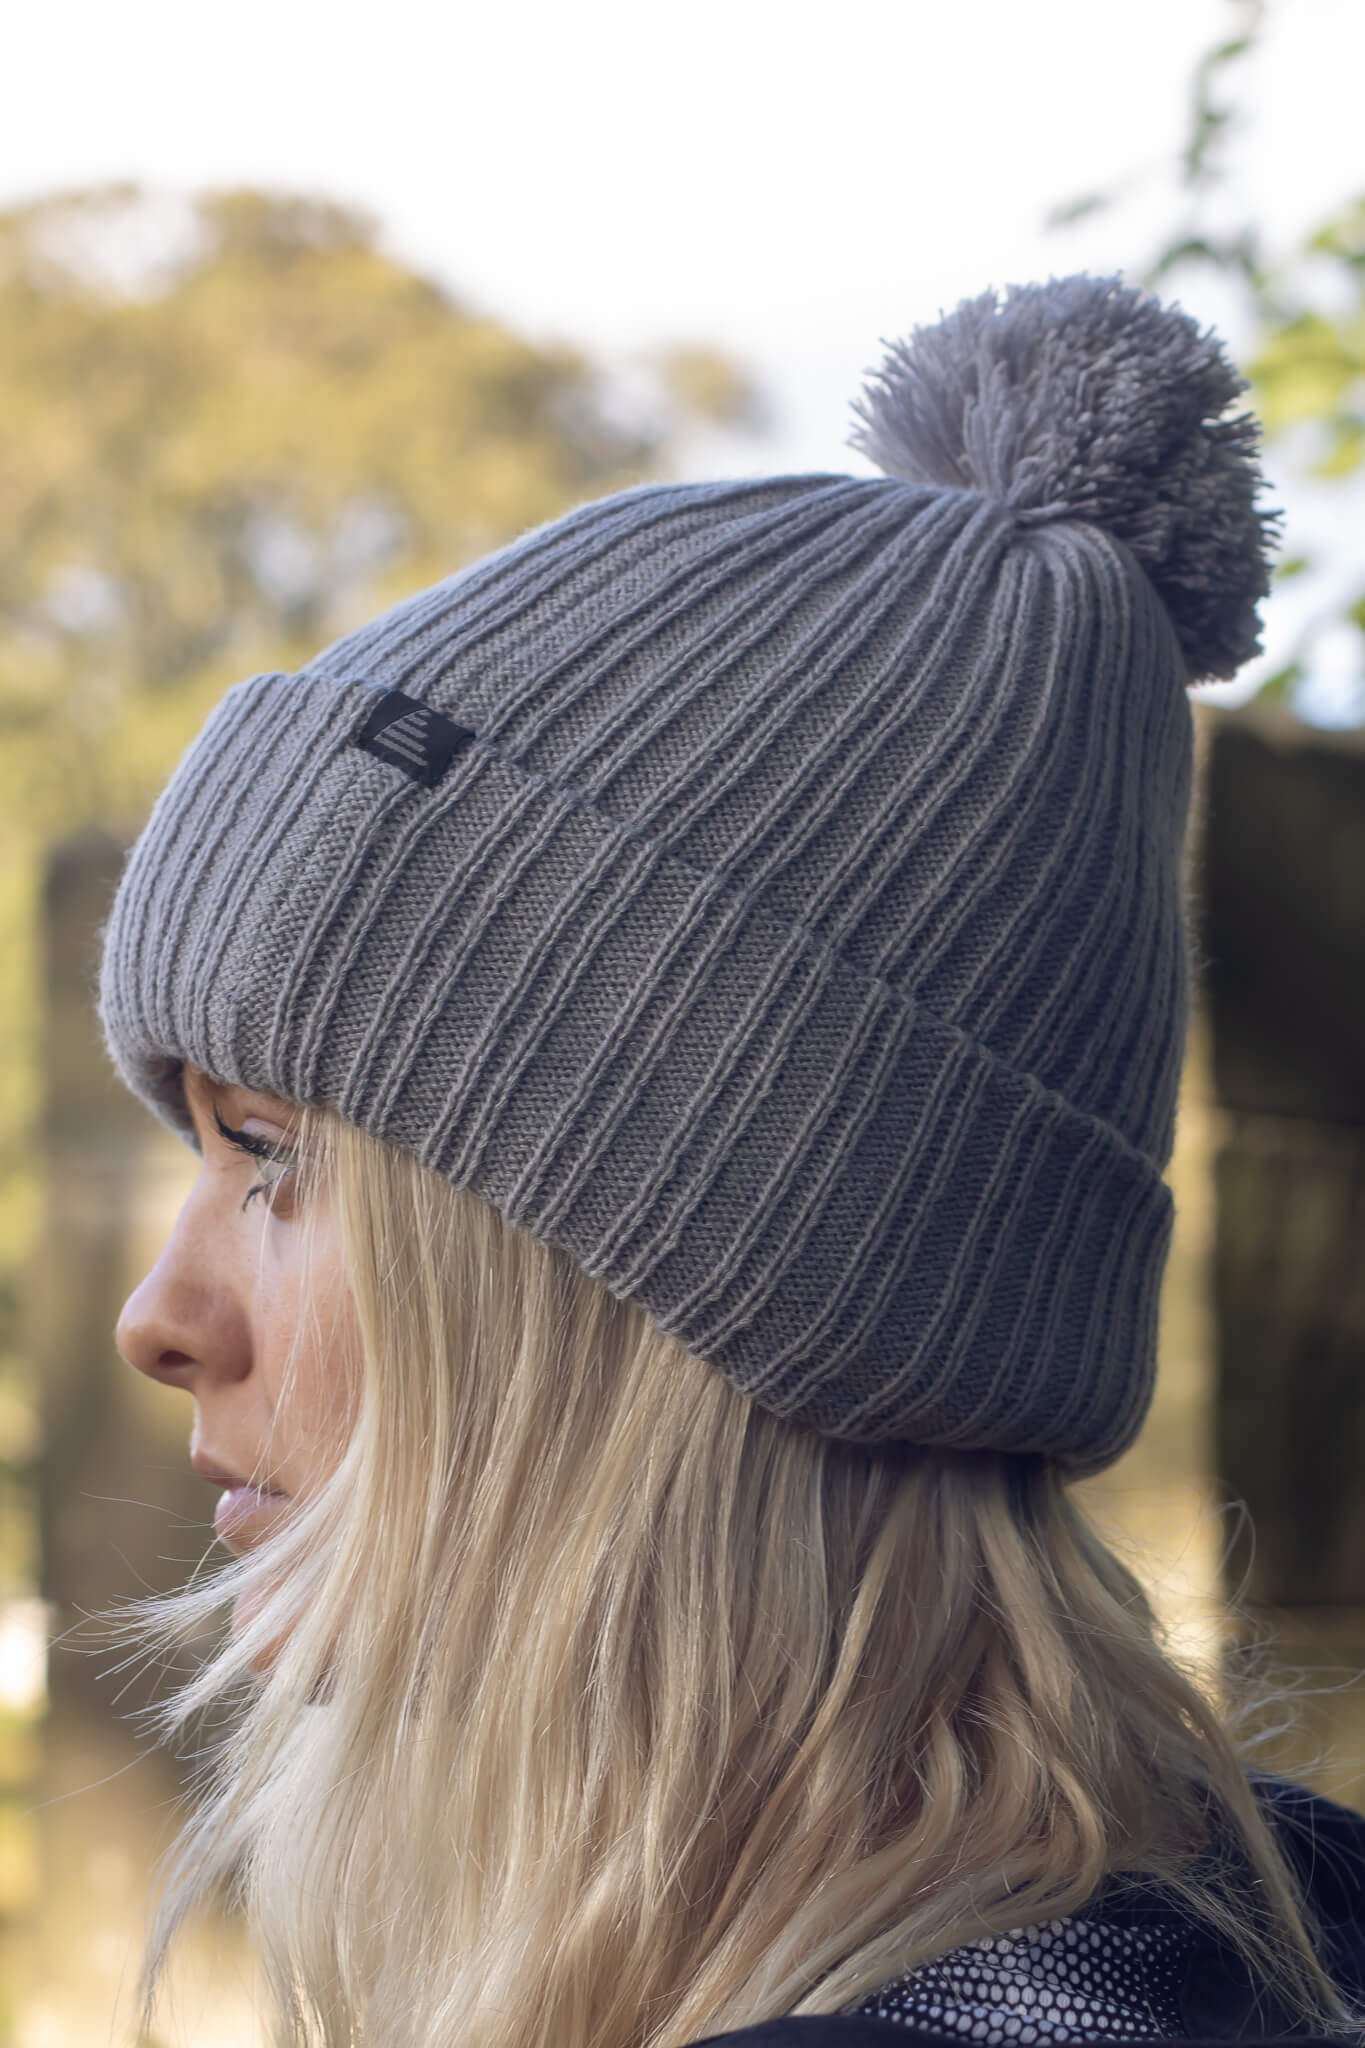 Model wearing a grey bobble hat from the Pendle Lifestyle collection.